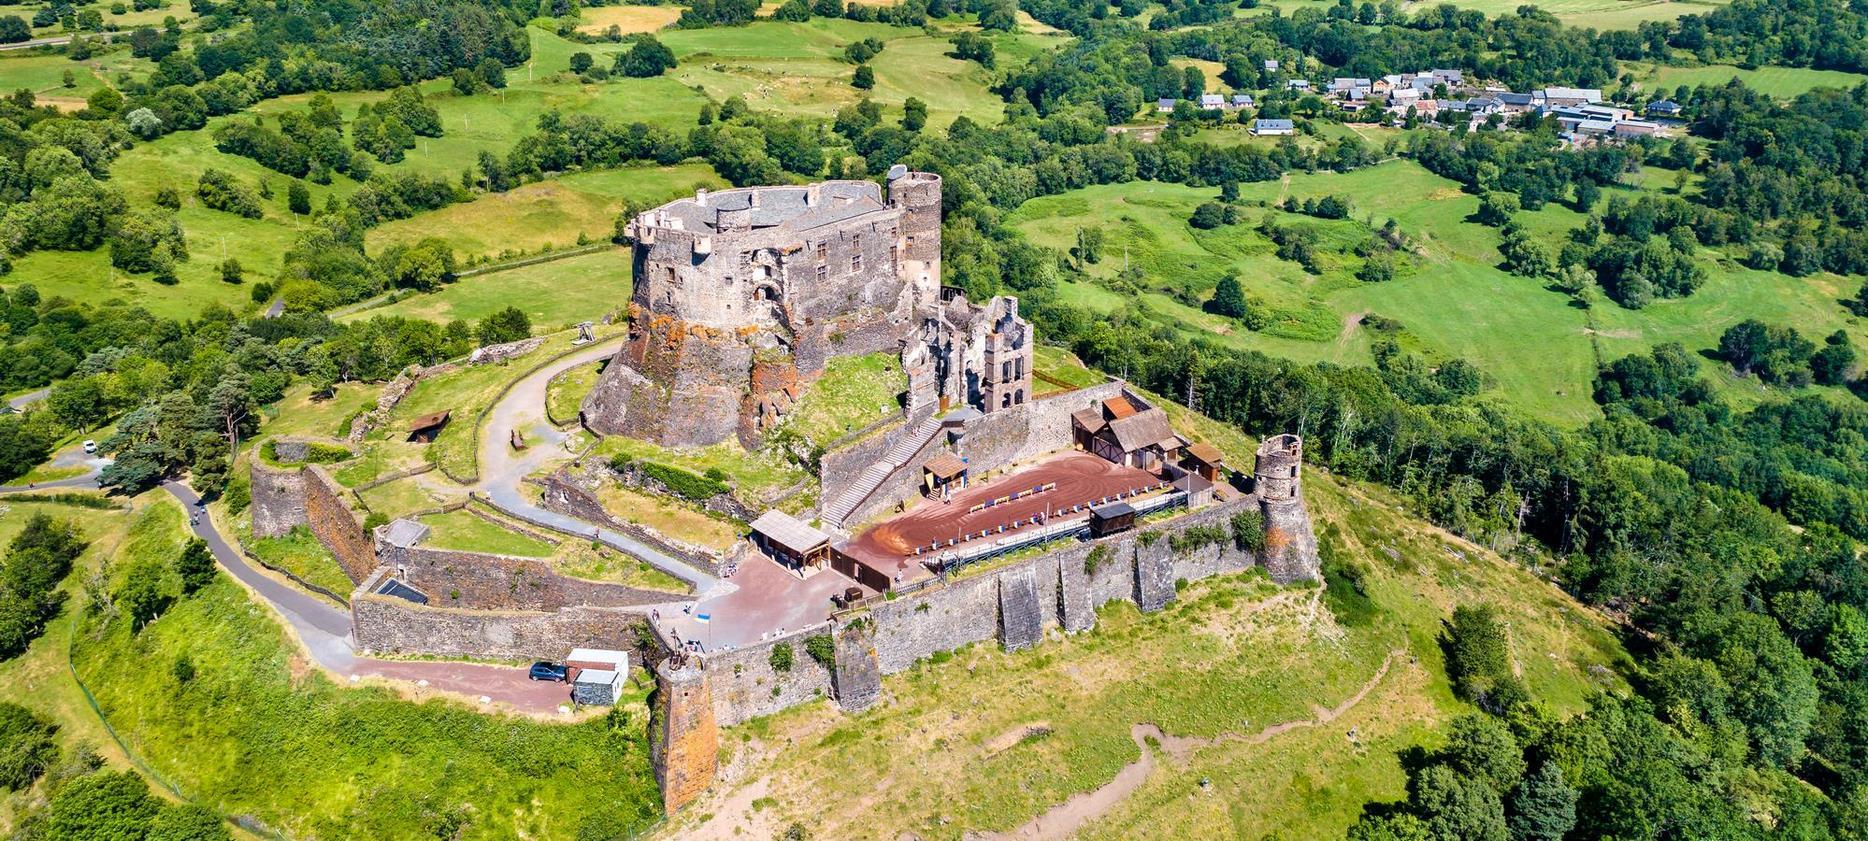 Aerial view of the castle of Murol, fortified castle in the Puy de Dôme